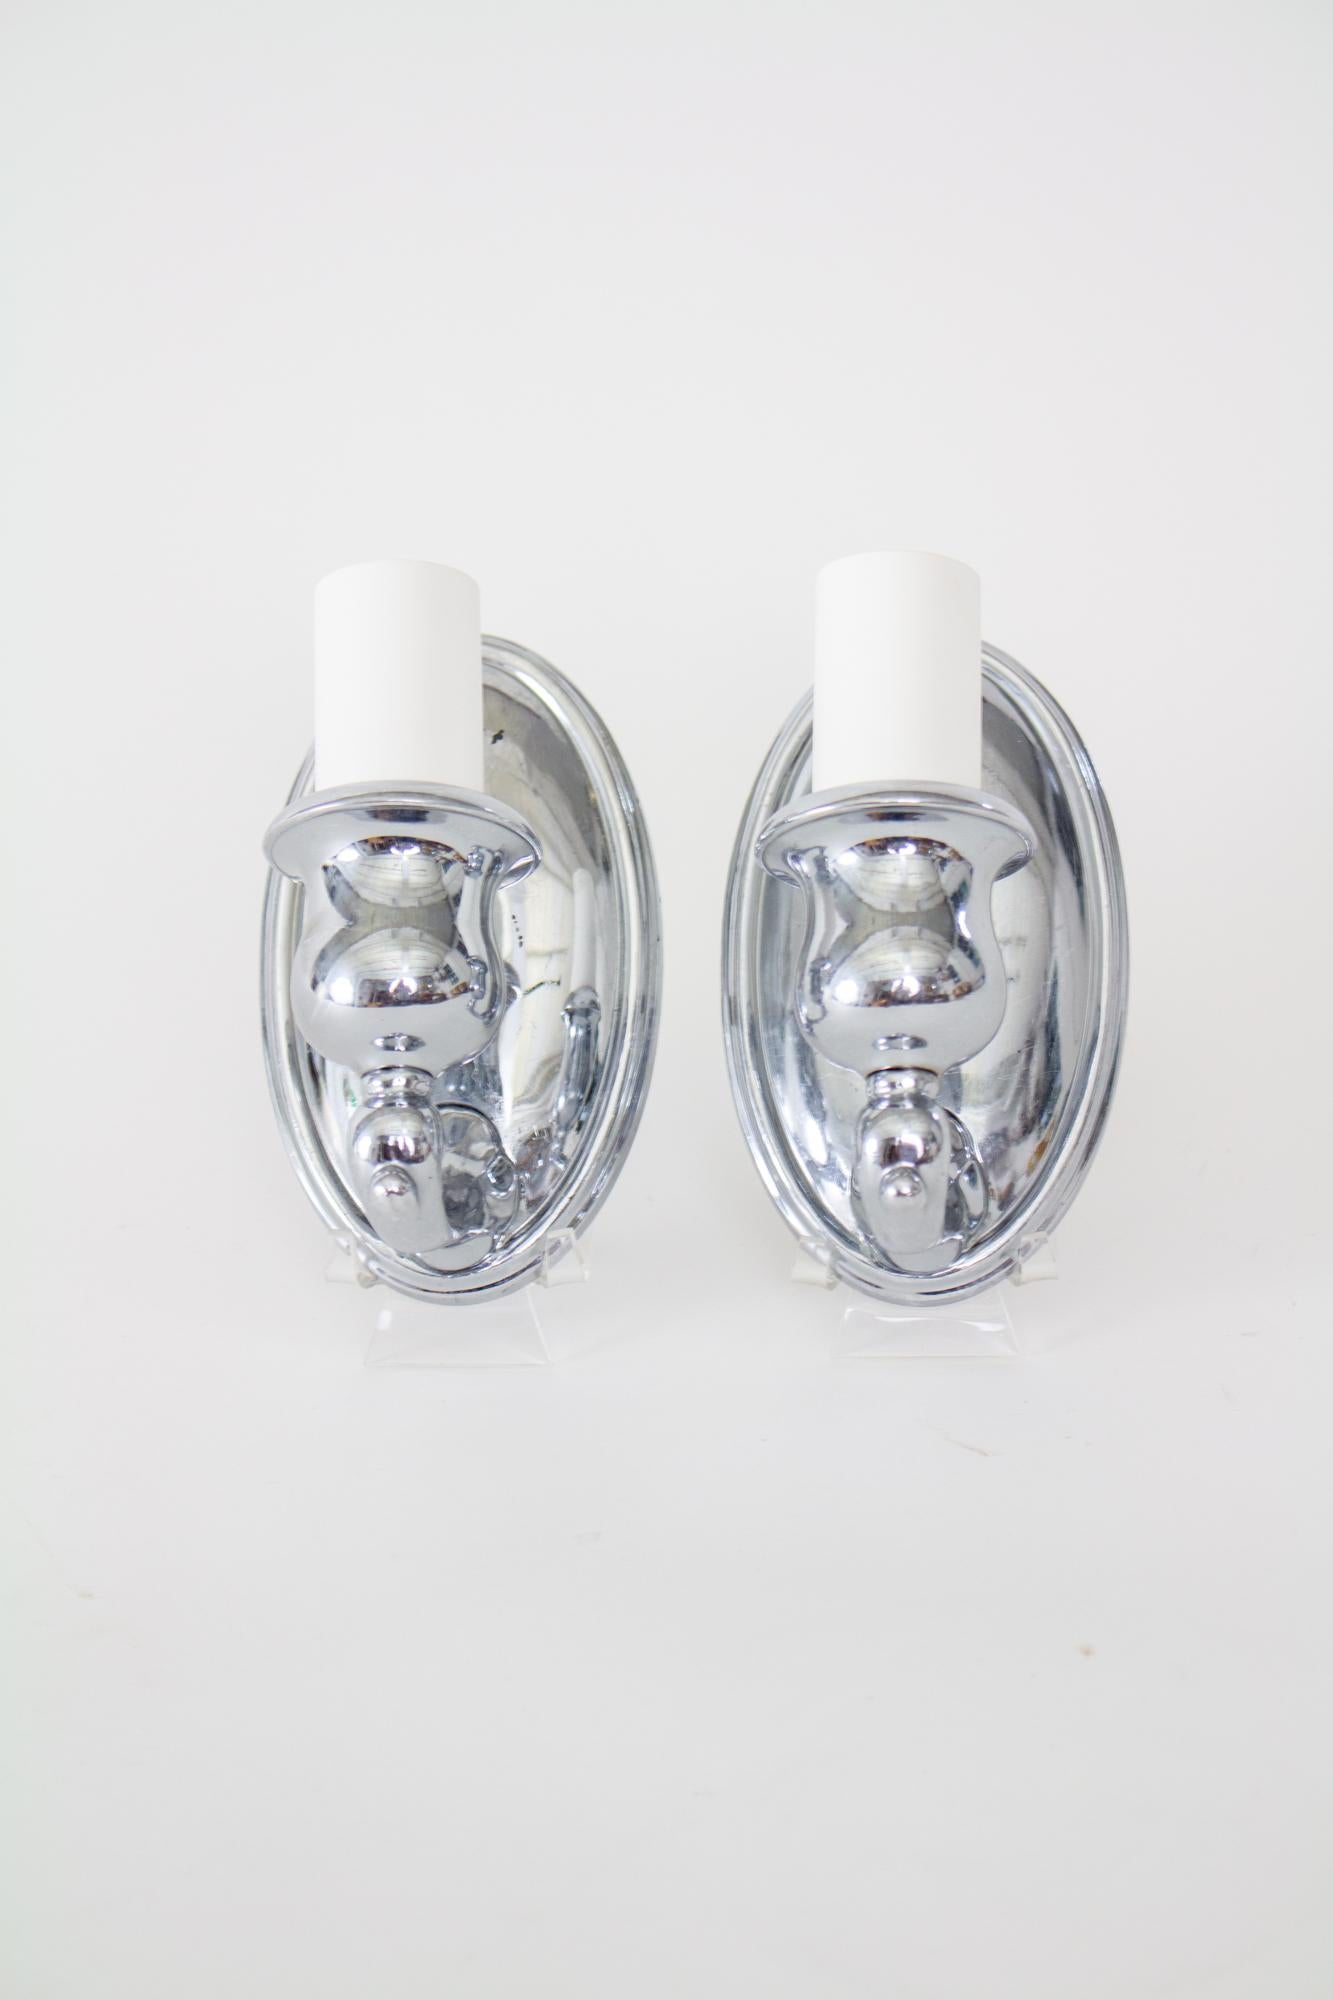 Bradley and Hubbard chrome sconces - a pair. Small sconces, marked with B&H on the backplate. US c. 1910. Oval backplate and small single arms with a curvy candle cup. White candle covers. Finish is in good condition, some chipping to the chrome